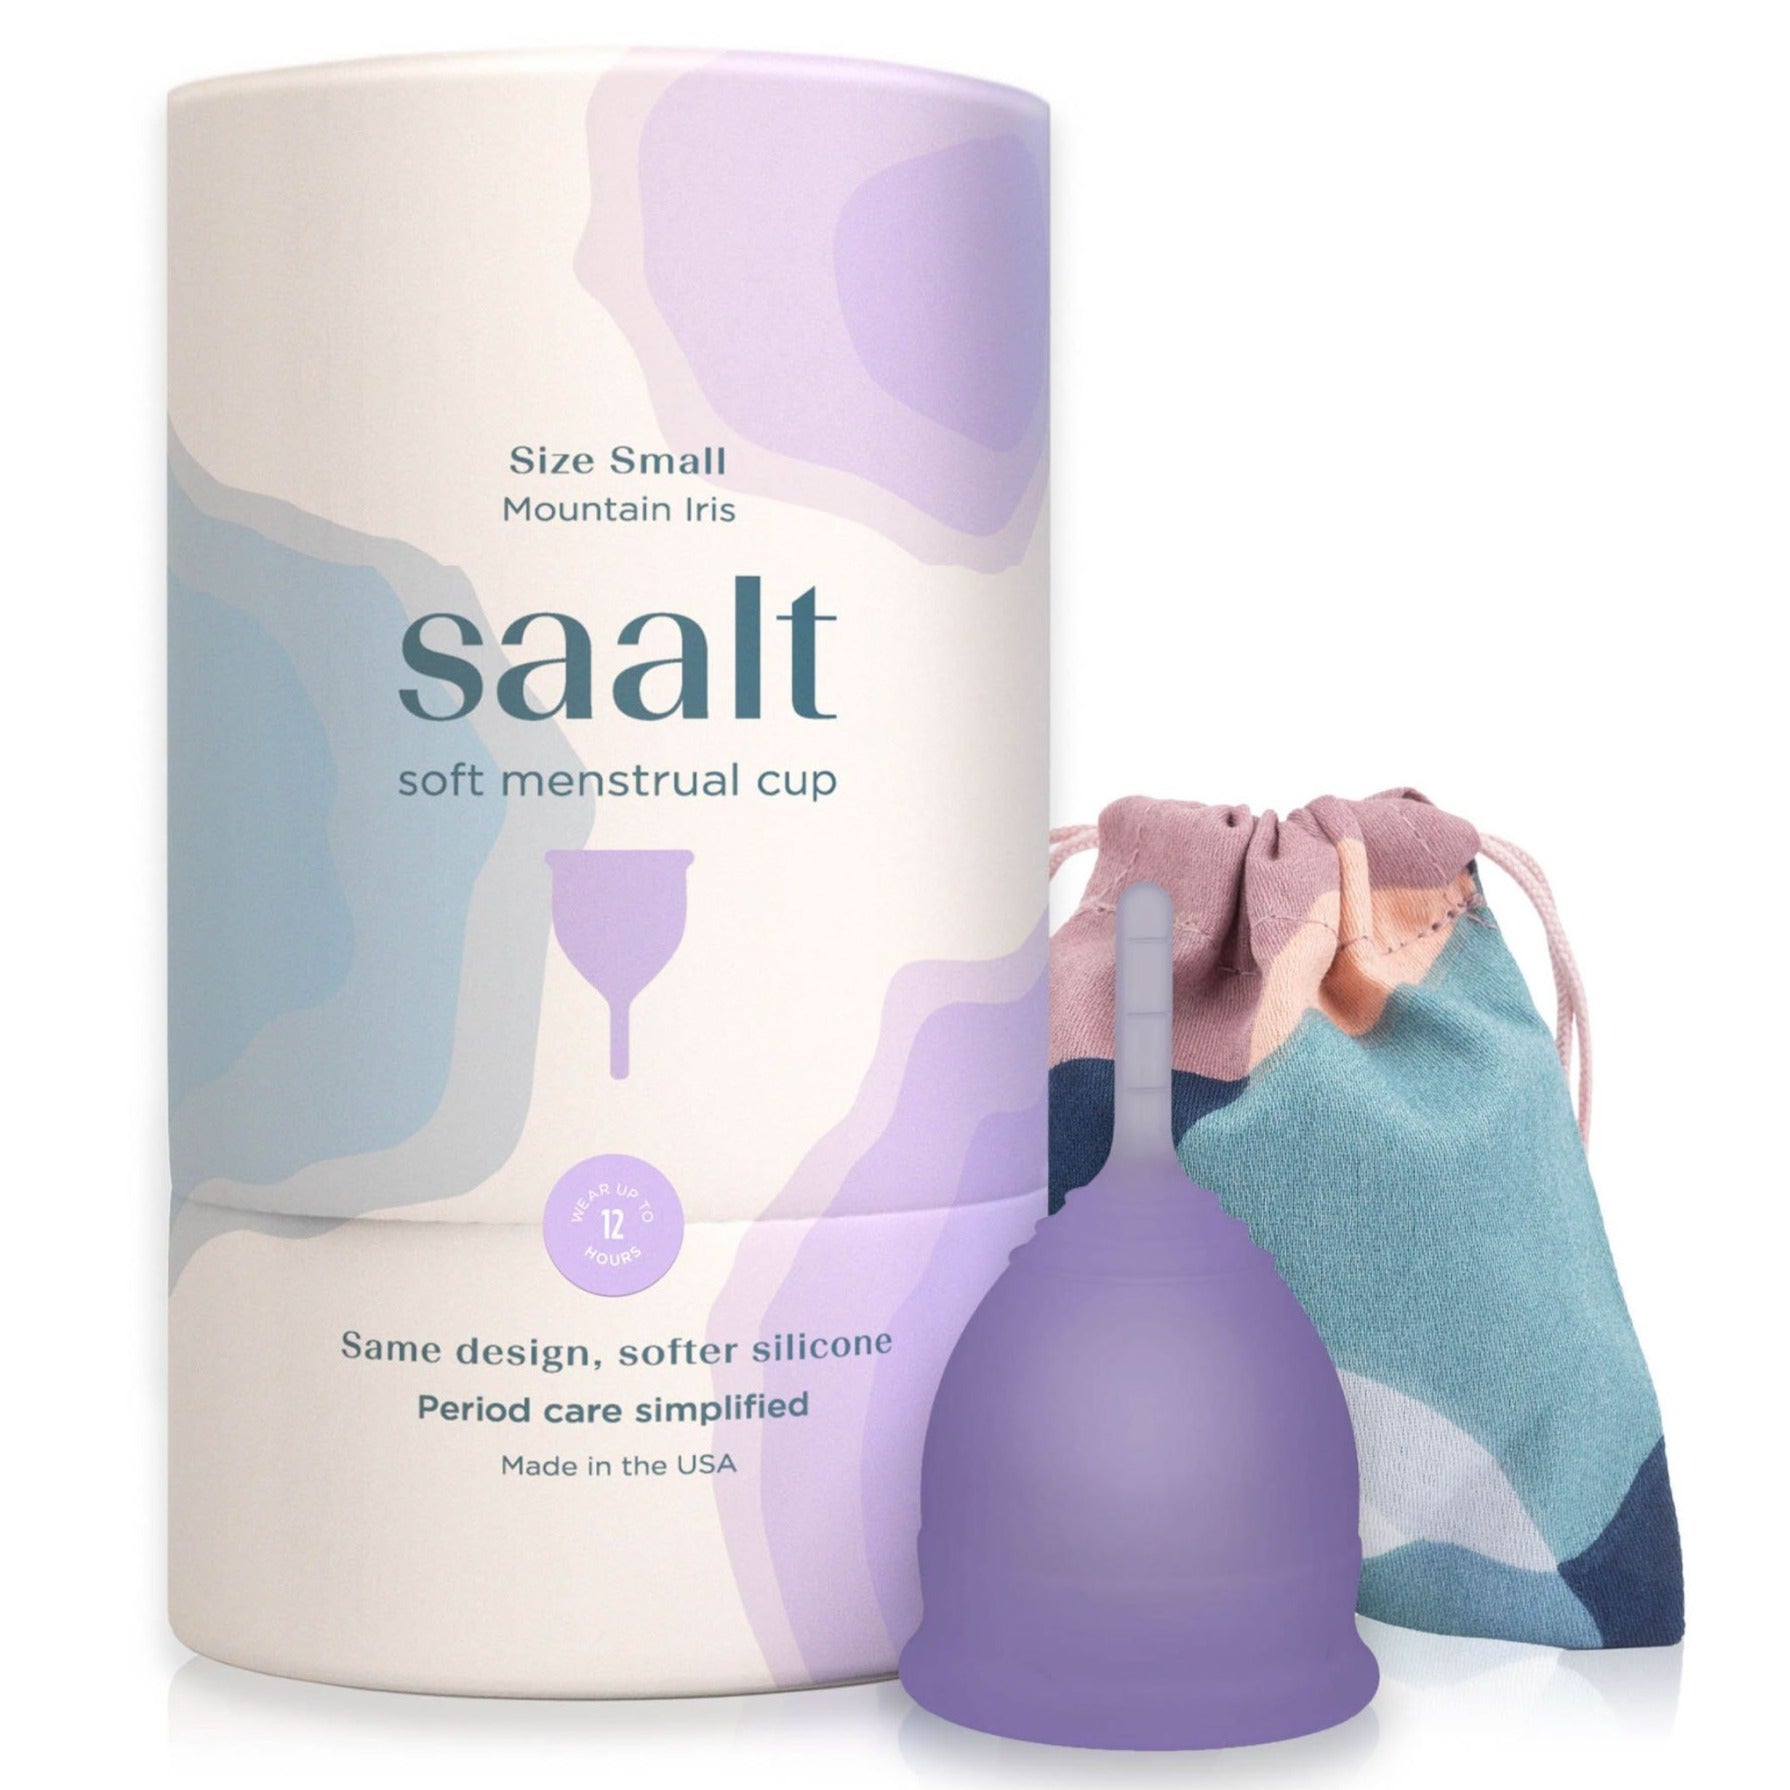 Saalt Menstrual Cup by The Period Co. | Get it at The Green Collective